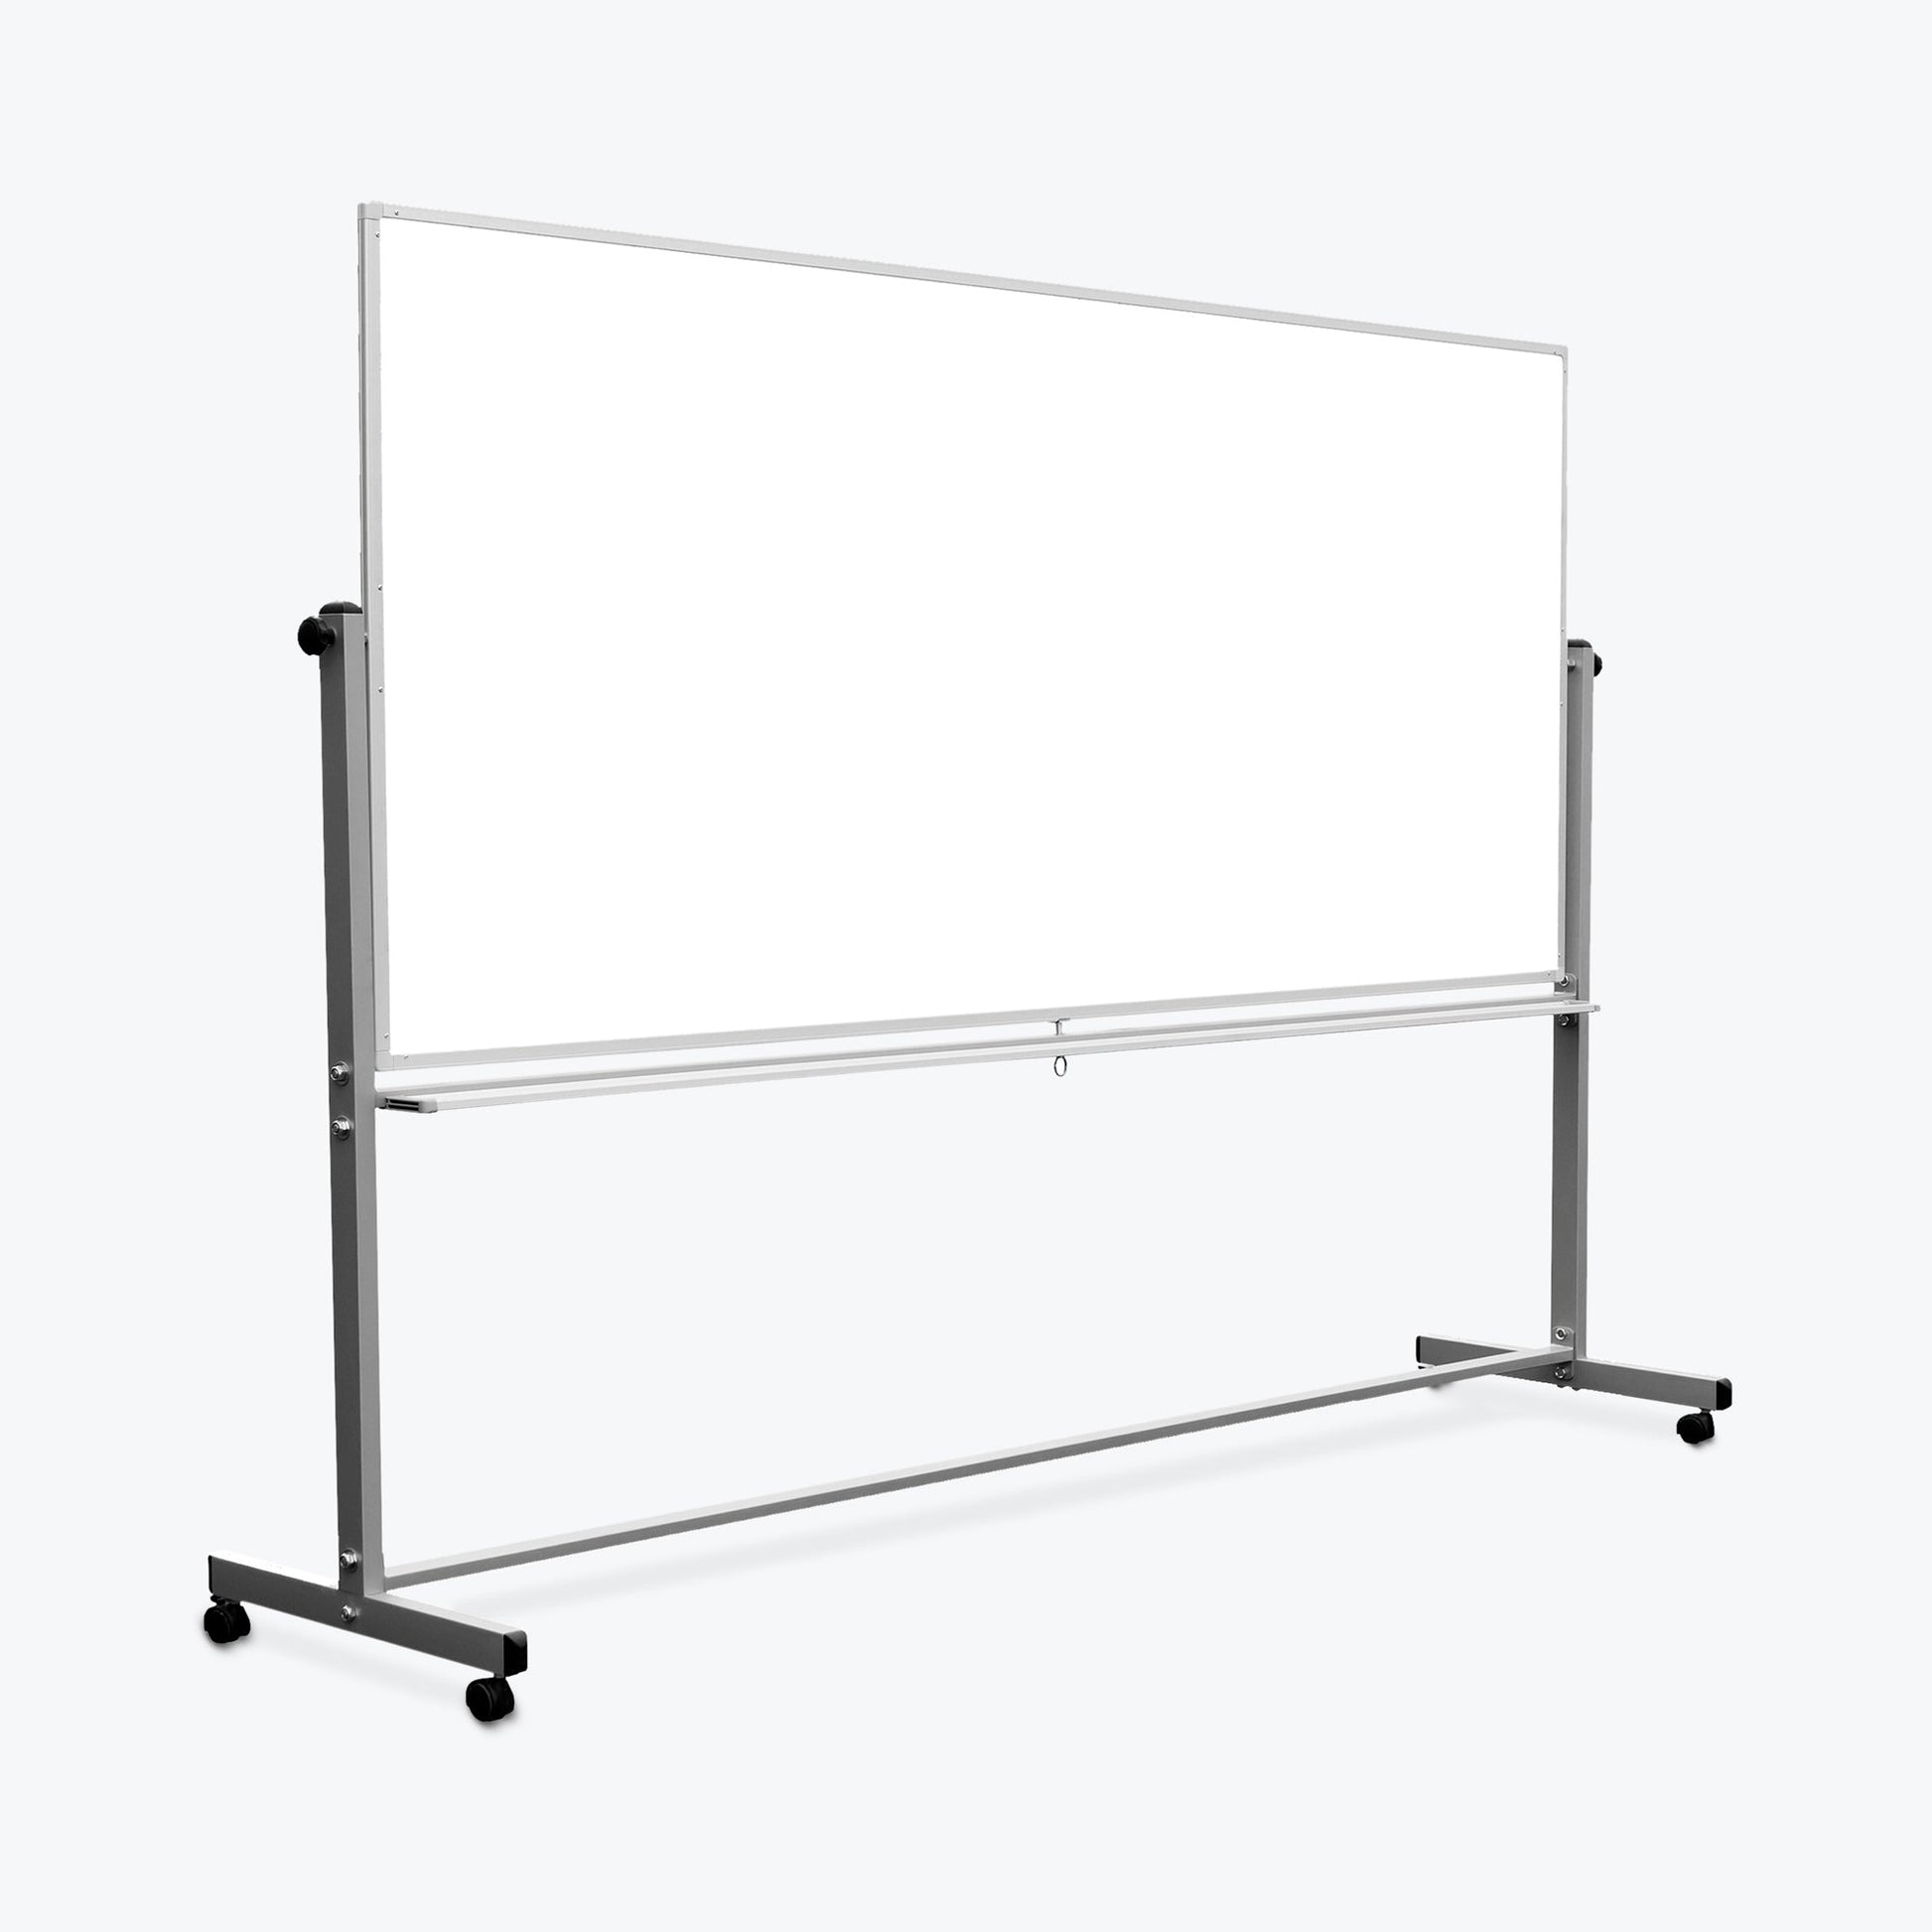 96"W x 40"H Mobile Whiteboard - Double-sided Magnetic dry erase markerboard - Luxor MB9640WW - SchoolOutlet